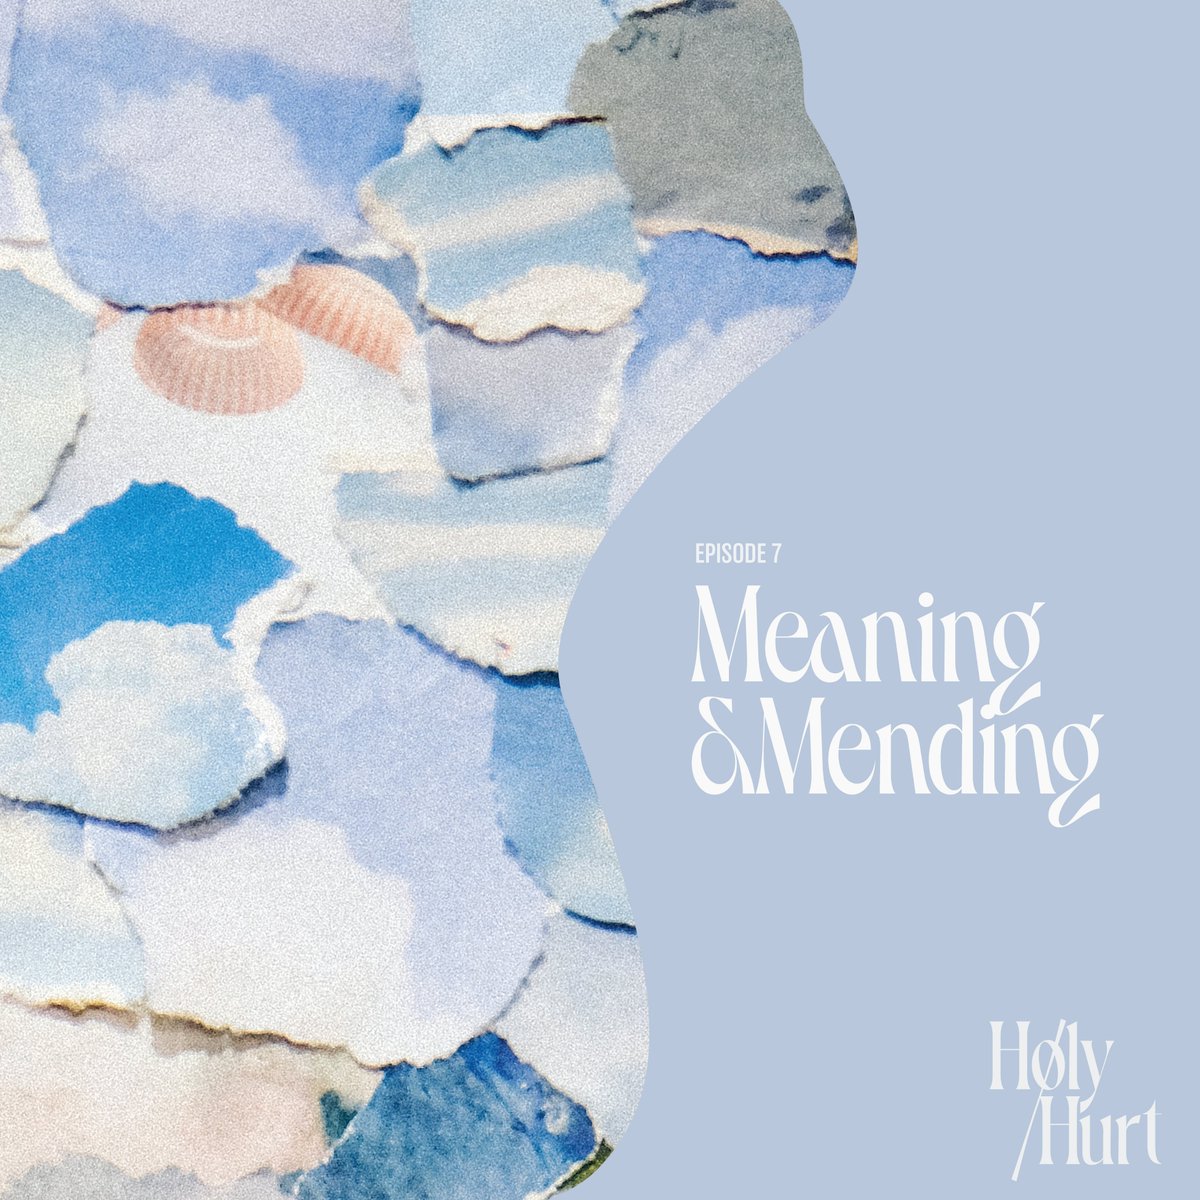 We are back with episode seven of the #HolyHurt podcast by @hillarylmcbride. In this week’s episode, she explores the process of making meaning through and mending from our trauma. Listen here: holyhurtpodcast.com/ep-7-meaning-m…